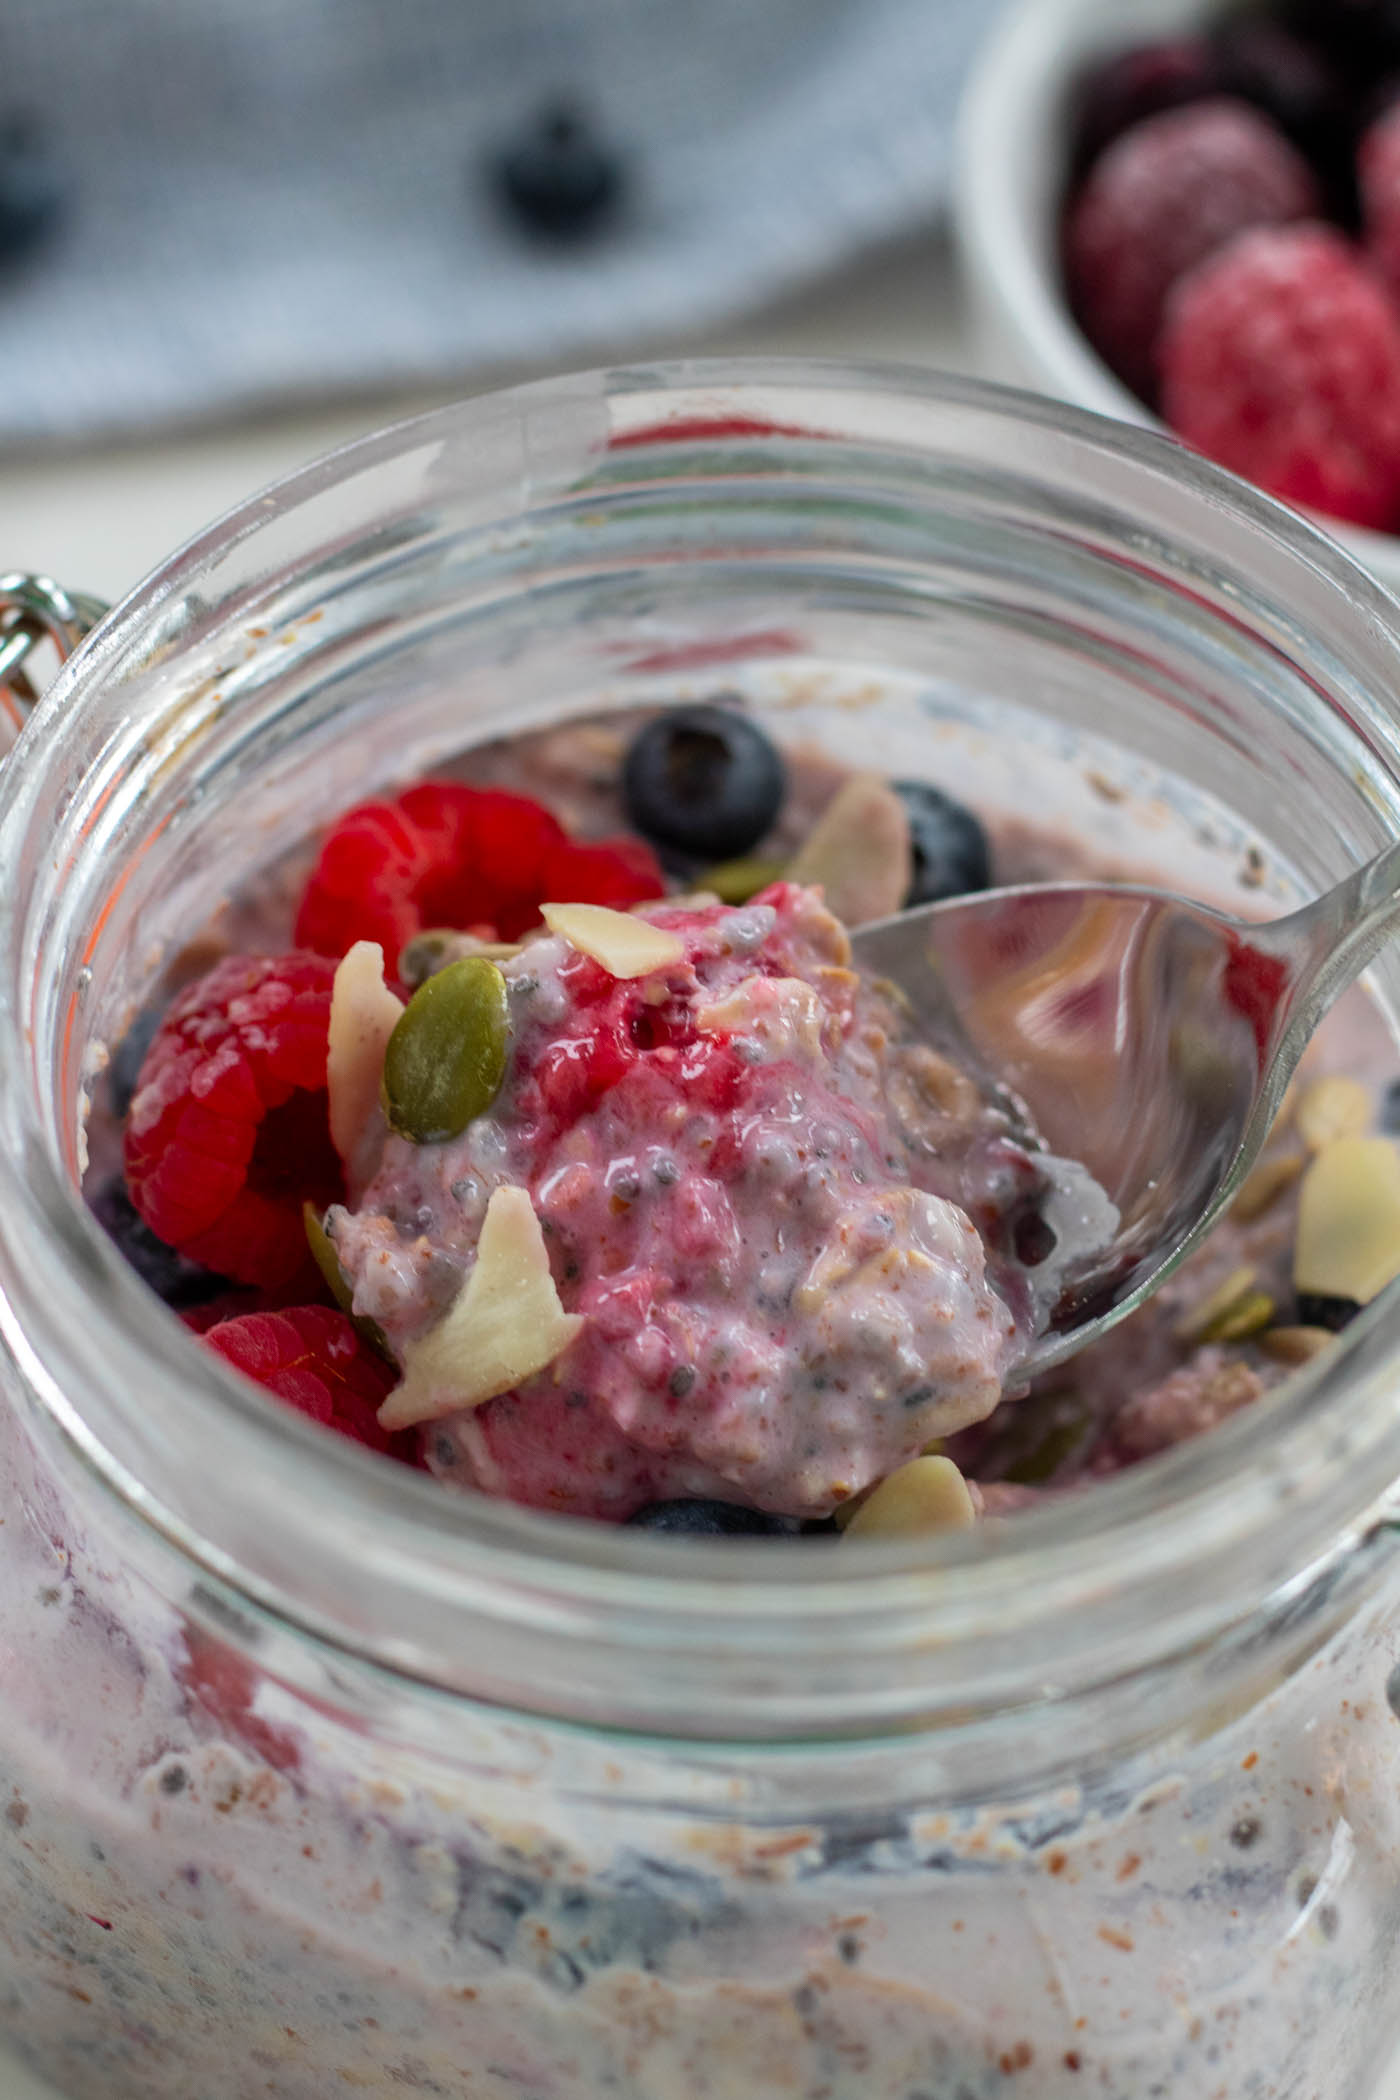 Easy overnight oats recipe with frozen fruit